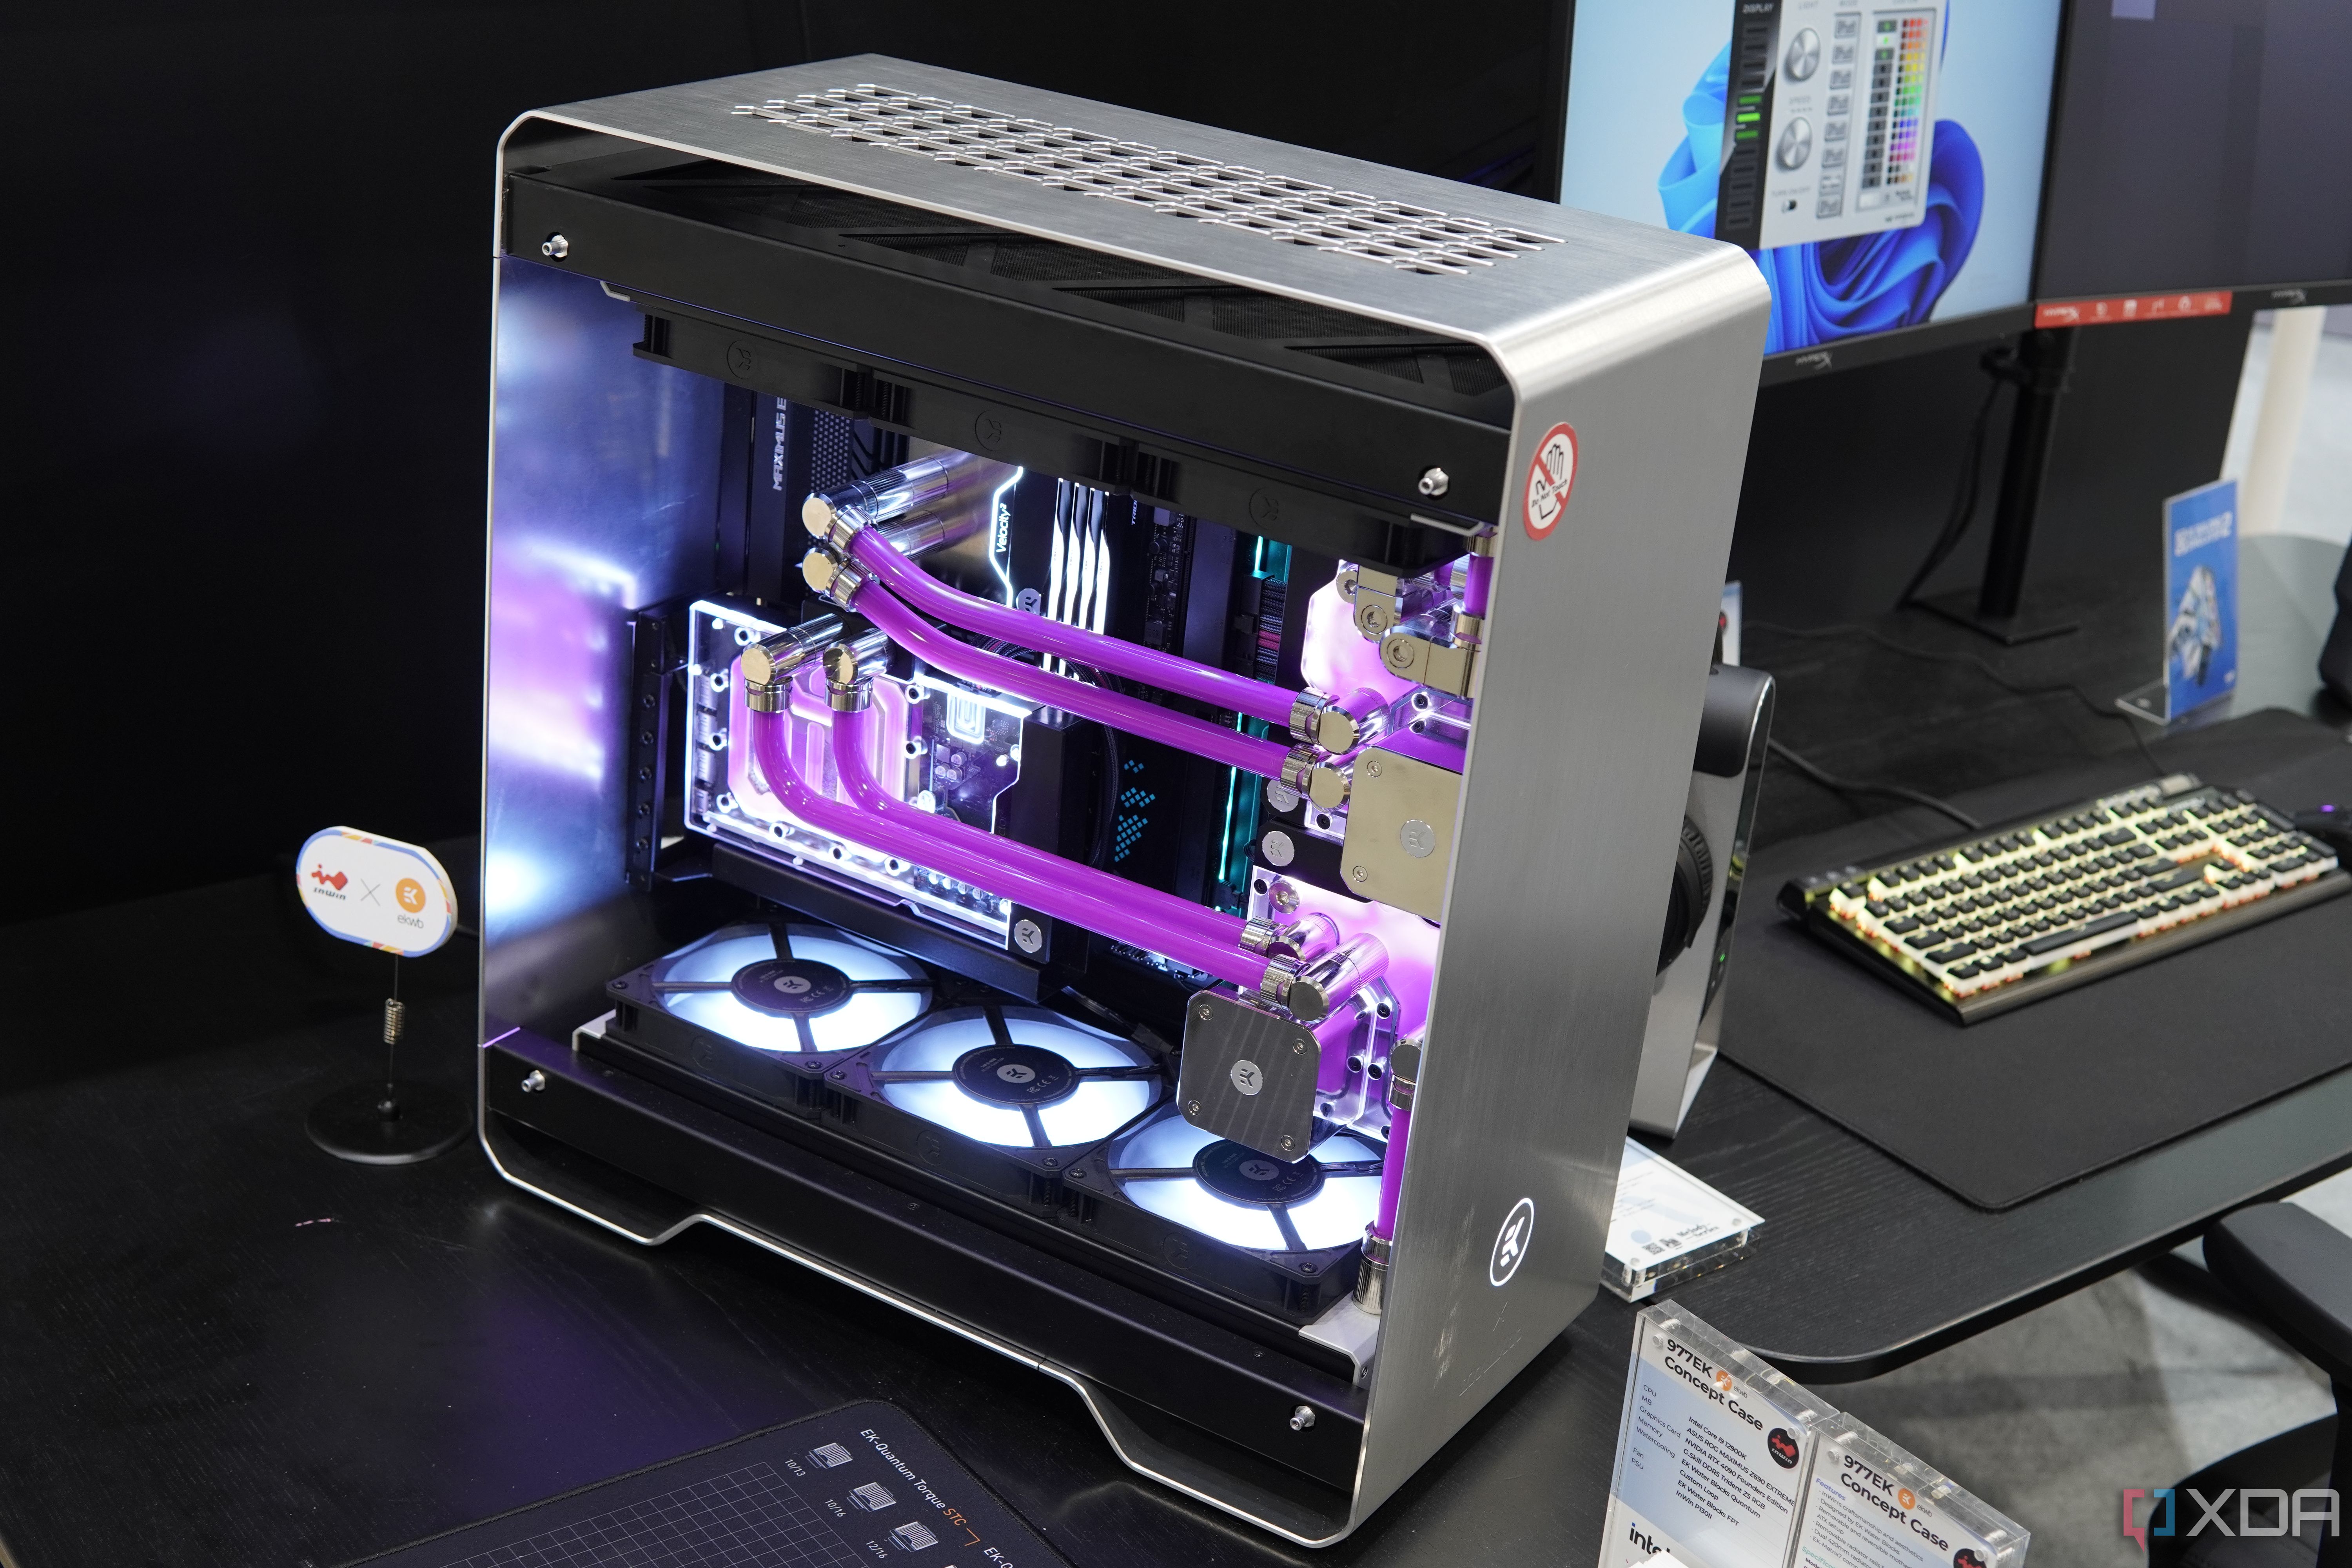 Angled view of the custom InWin 977EK PC build featuring a silver-colored metal chassis and two liquid cooling loops with pink liquid